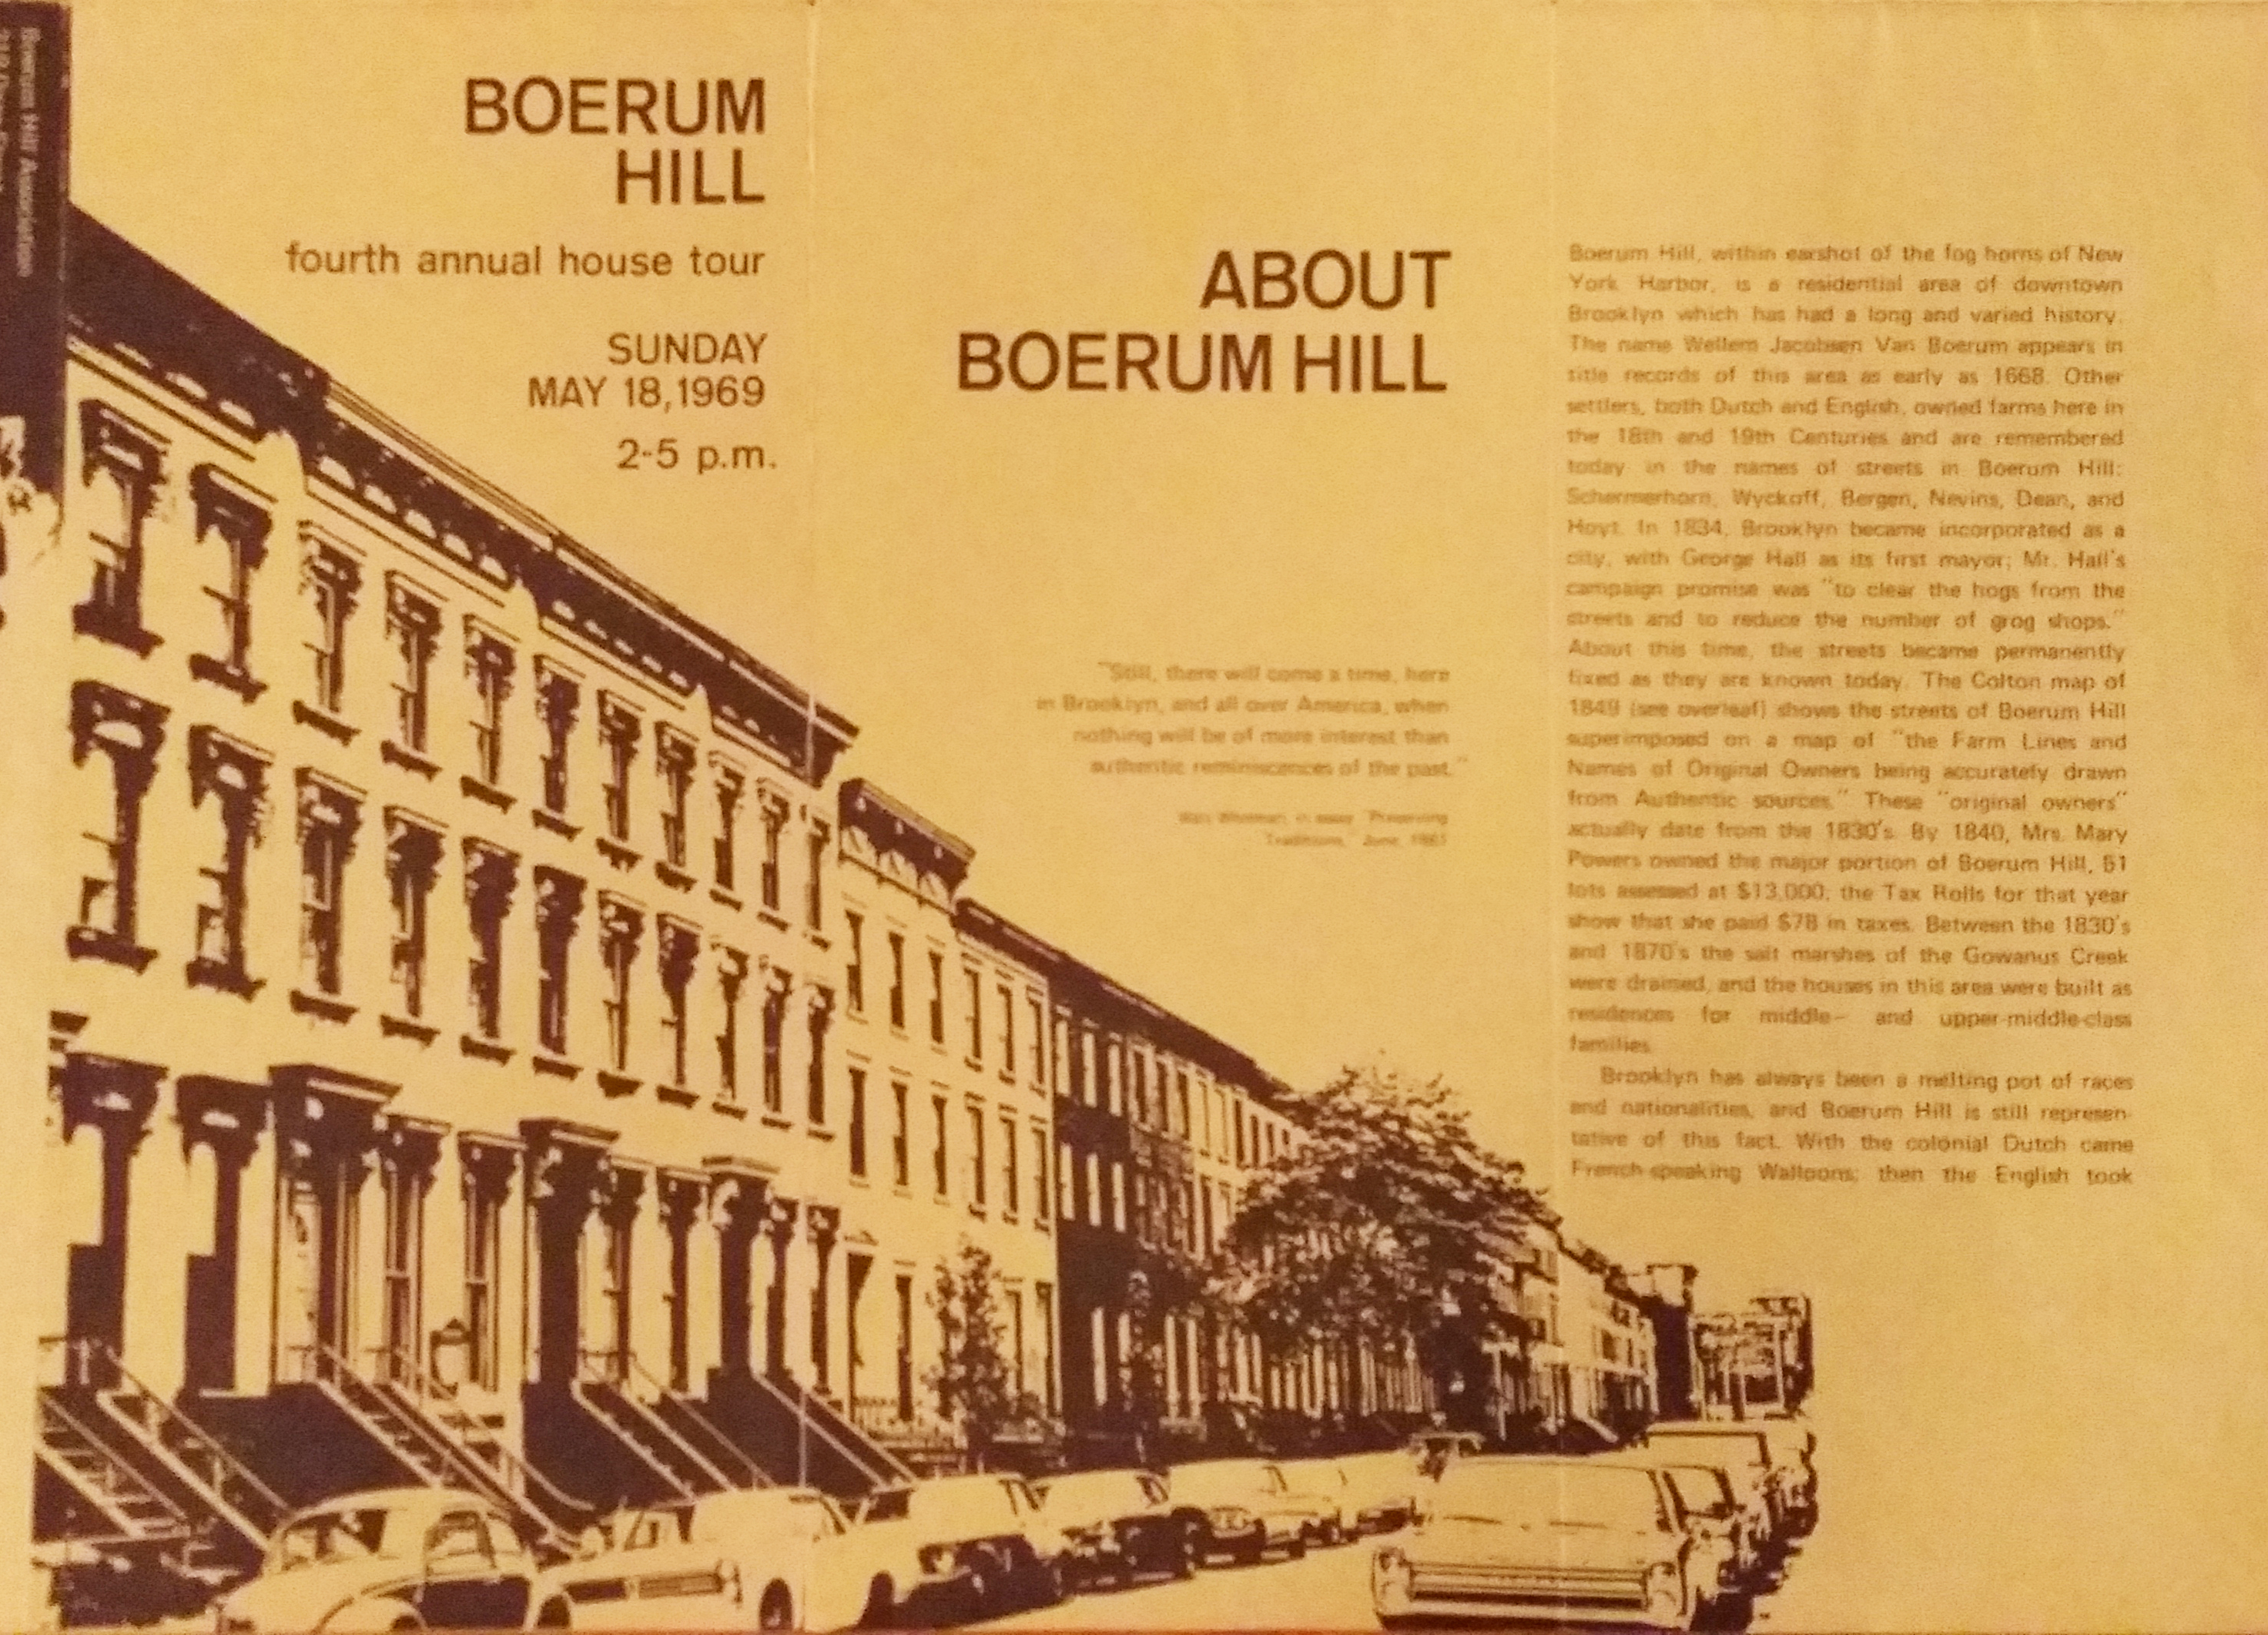 Pamphlet from 1969 Boerum Hill House Tour via Brooklyn Historical Society. Photo by Barbara Eldredge